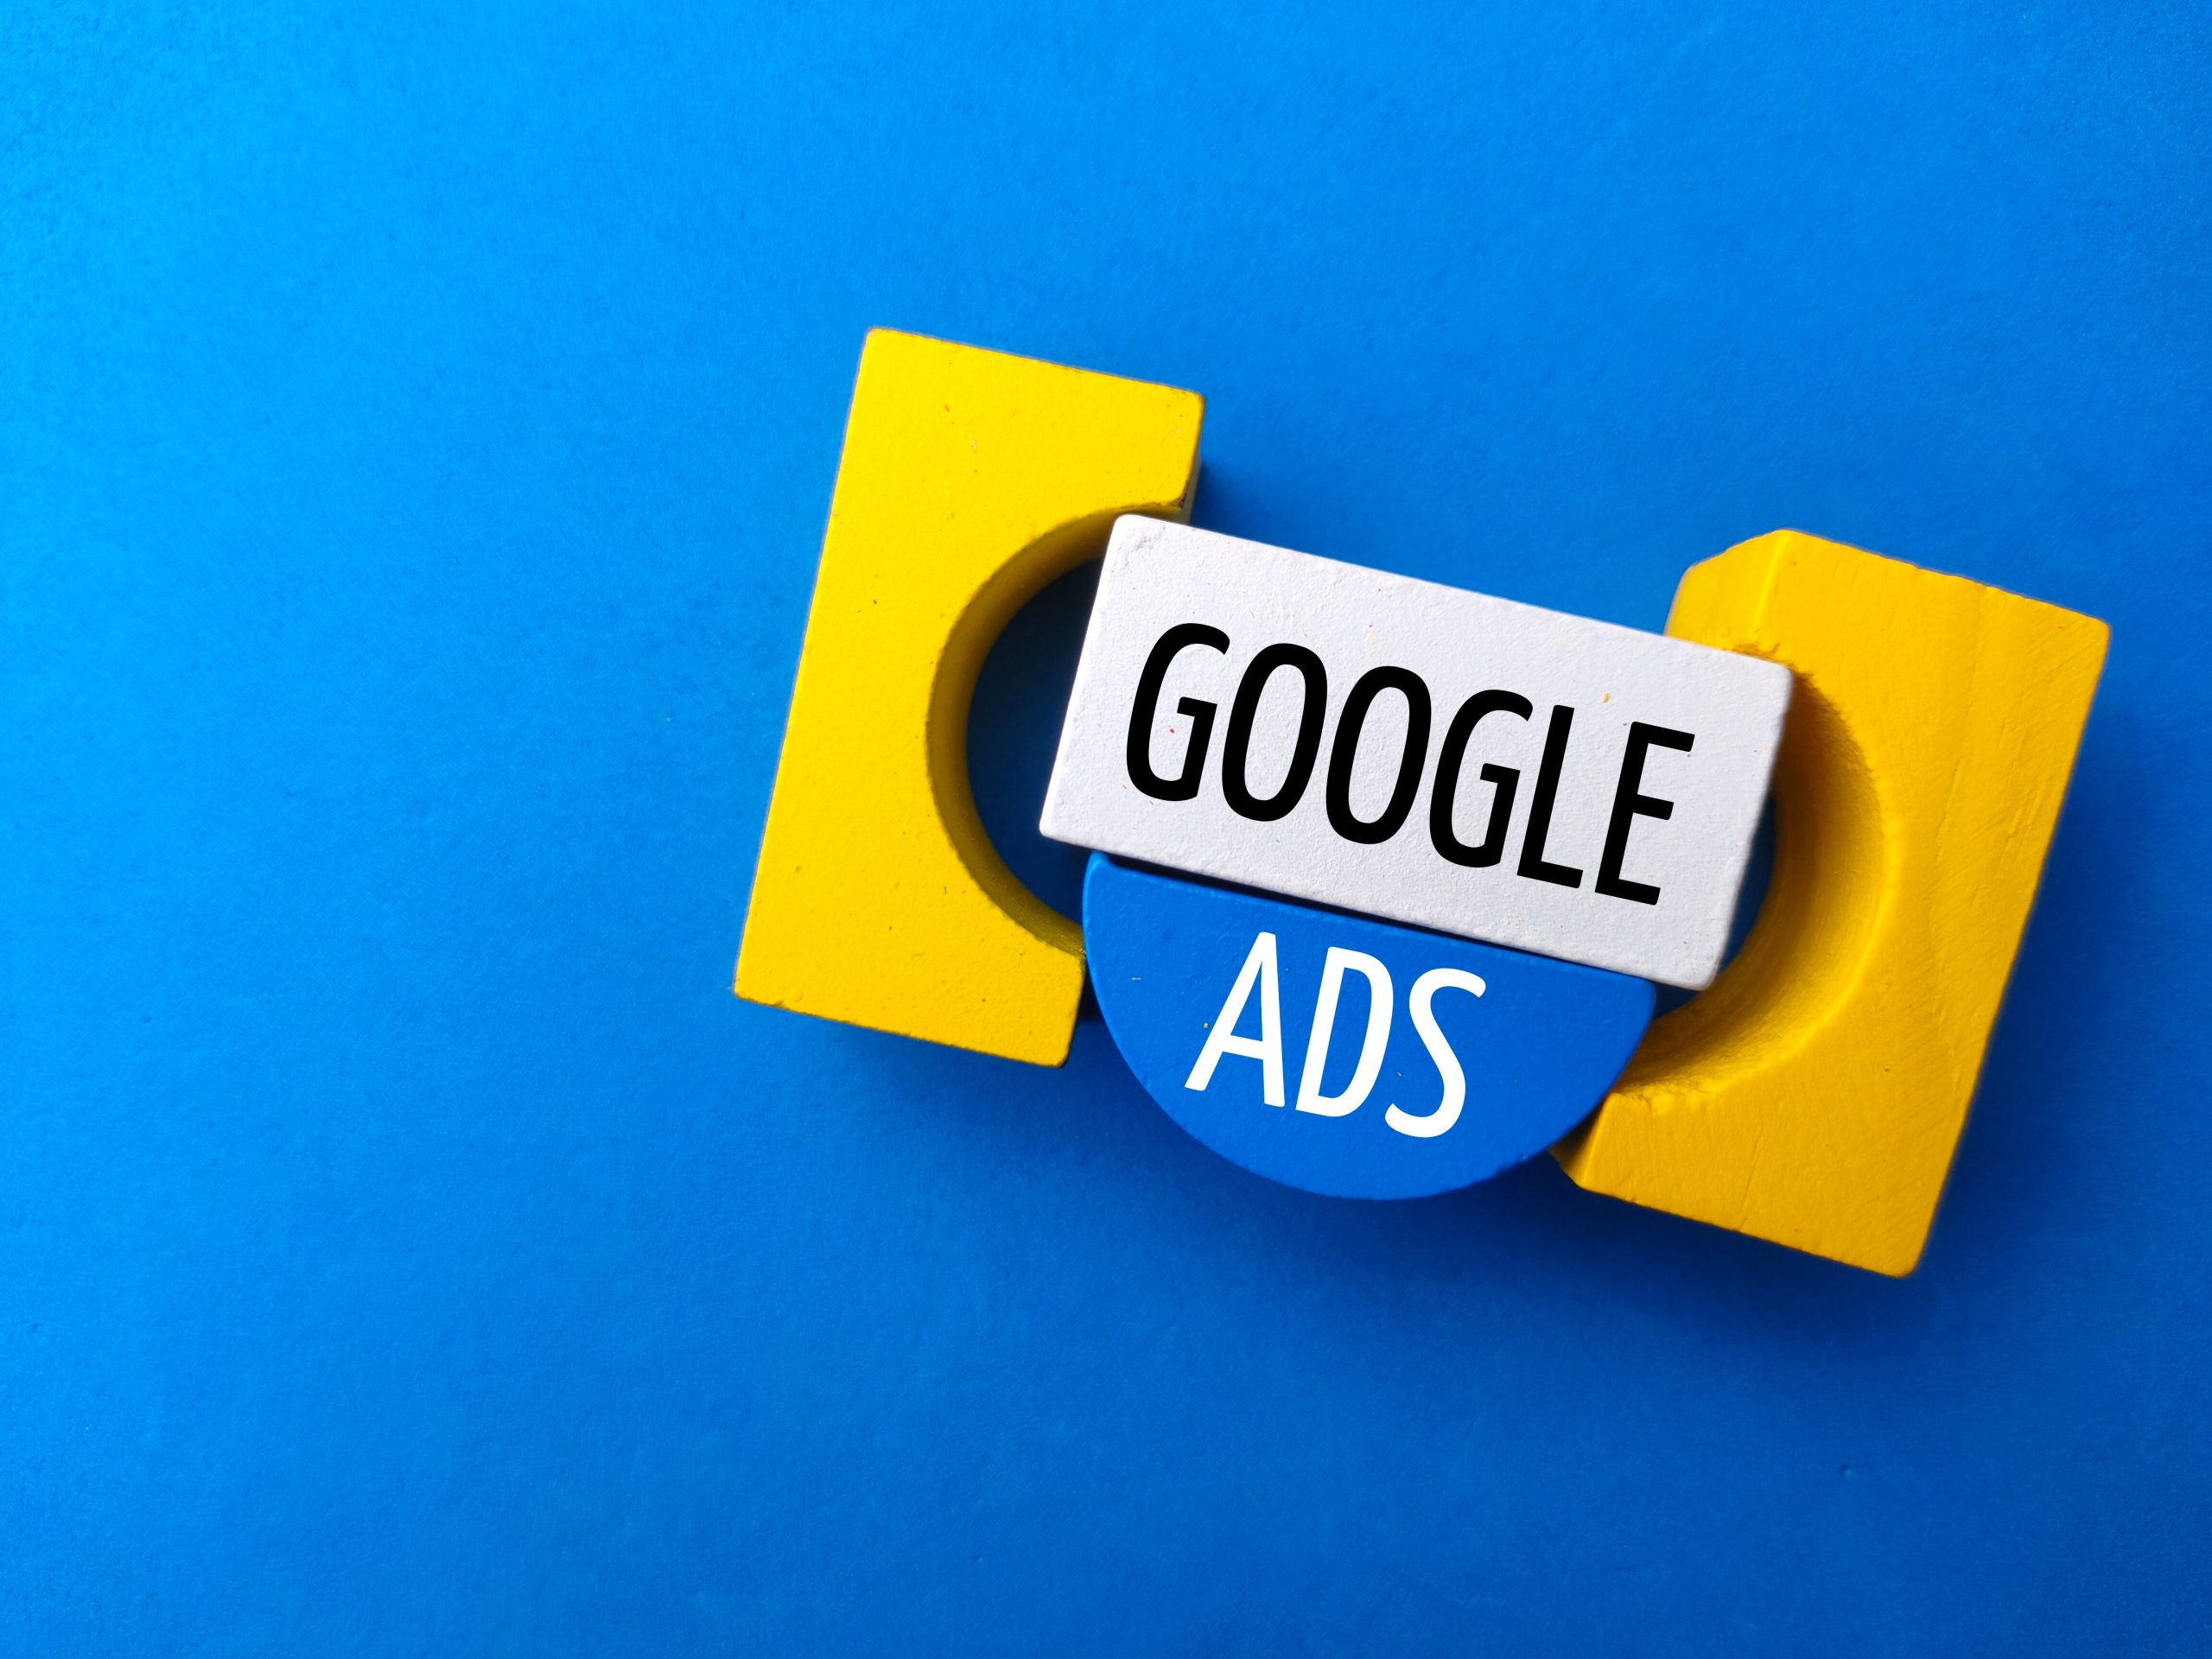 How to use Google Ads for Digital Marketing?